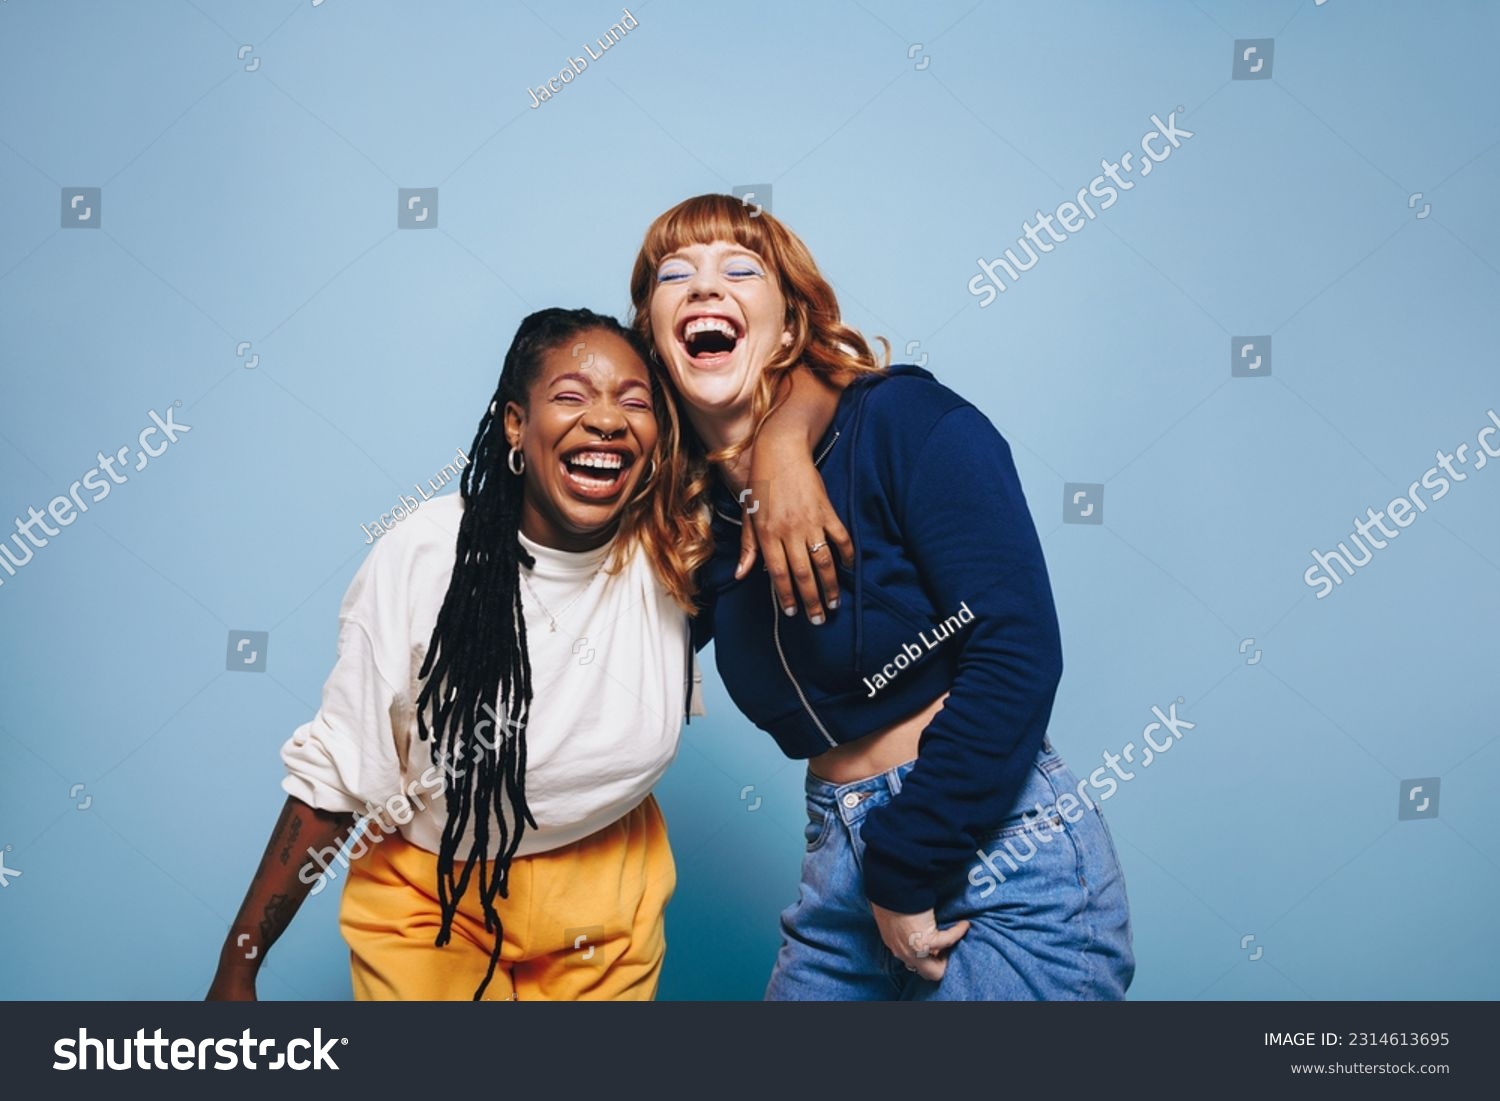 Best friends laughing and having a good time together in a studio. Happy young women enjoying themselves while standing against a blue background. Two vibrant female friends making memories. #2314613695